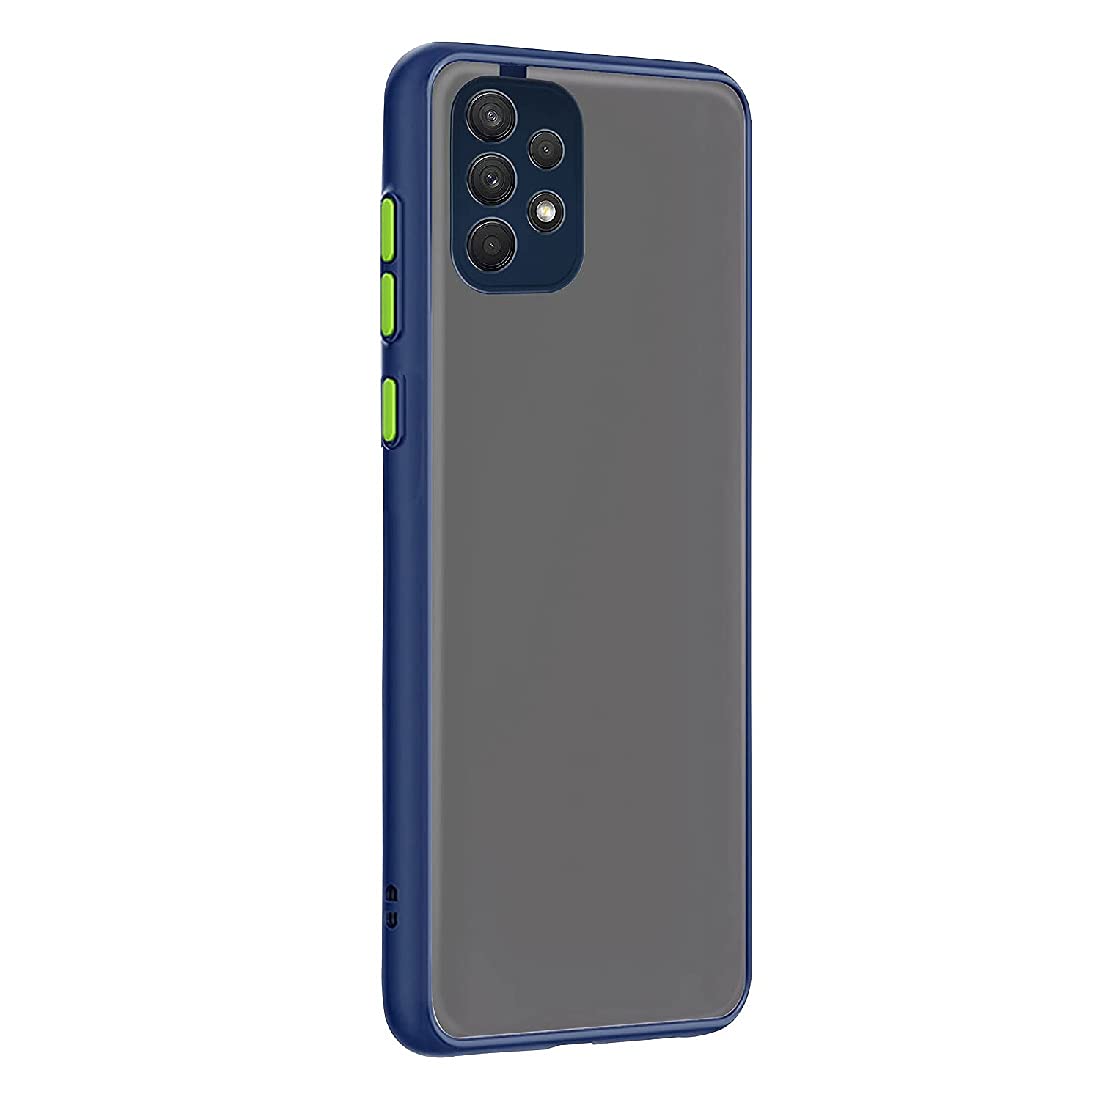 Smoke Back Case Cover for Samsung Galaxy A52 4G